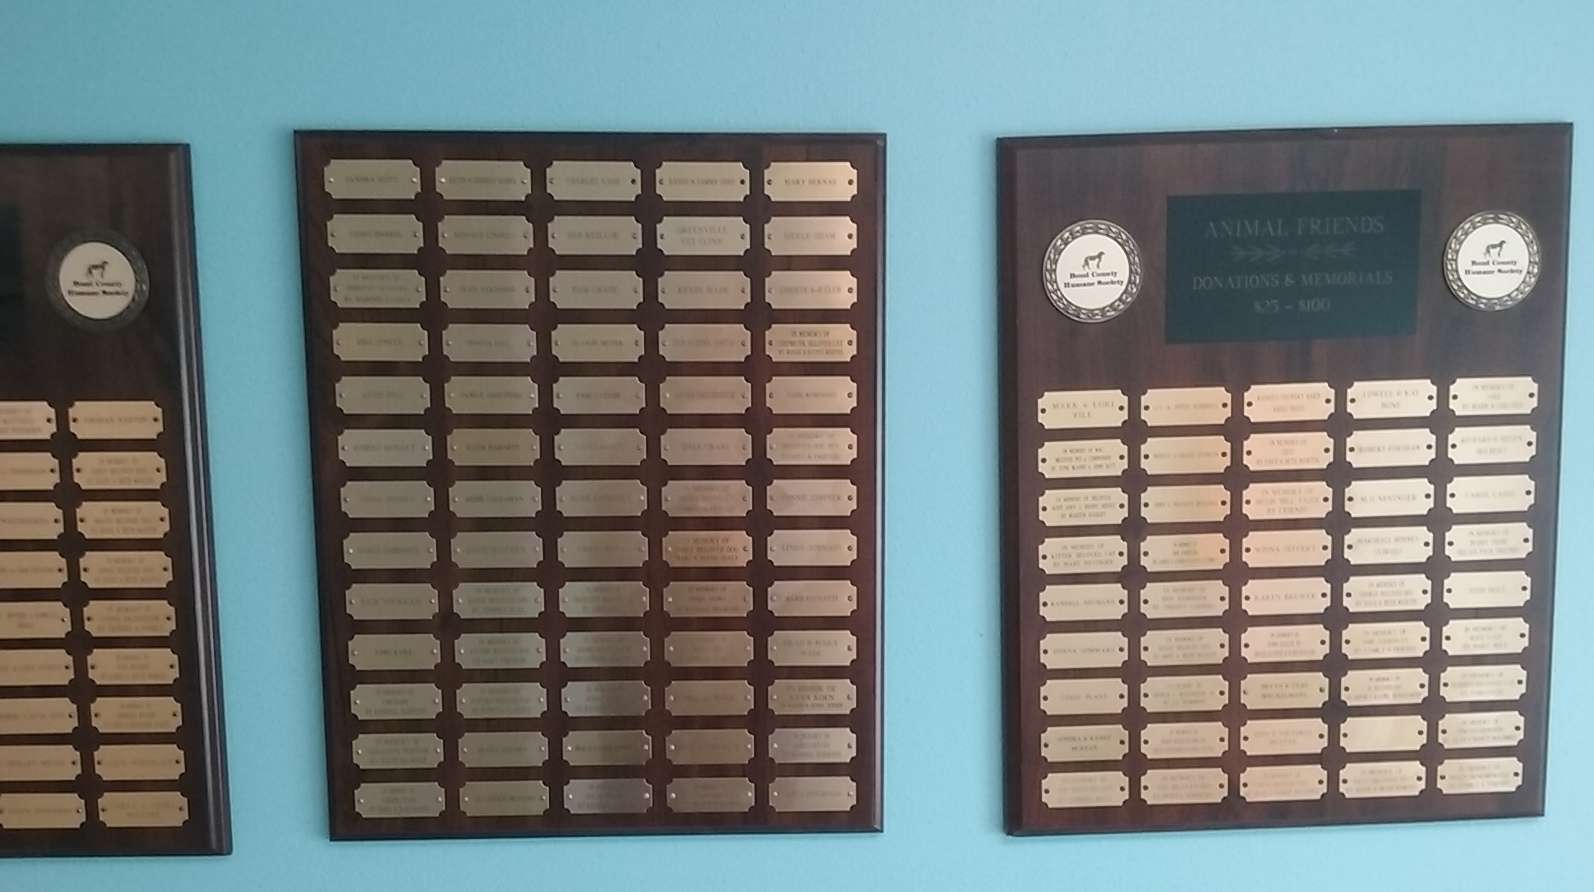 Plaques displayed Office and Adoption Center's Memory Wall